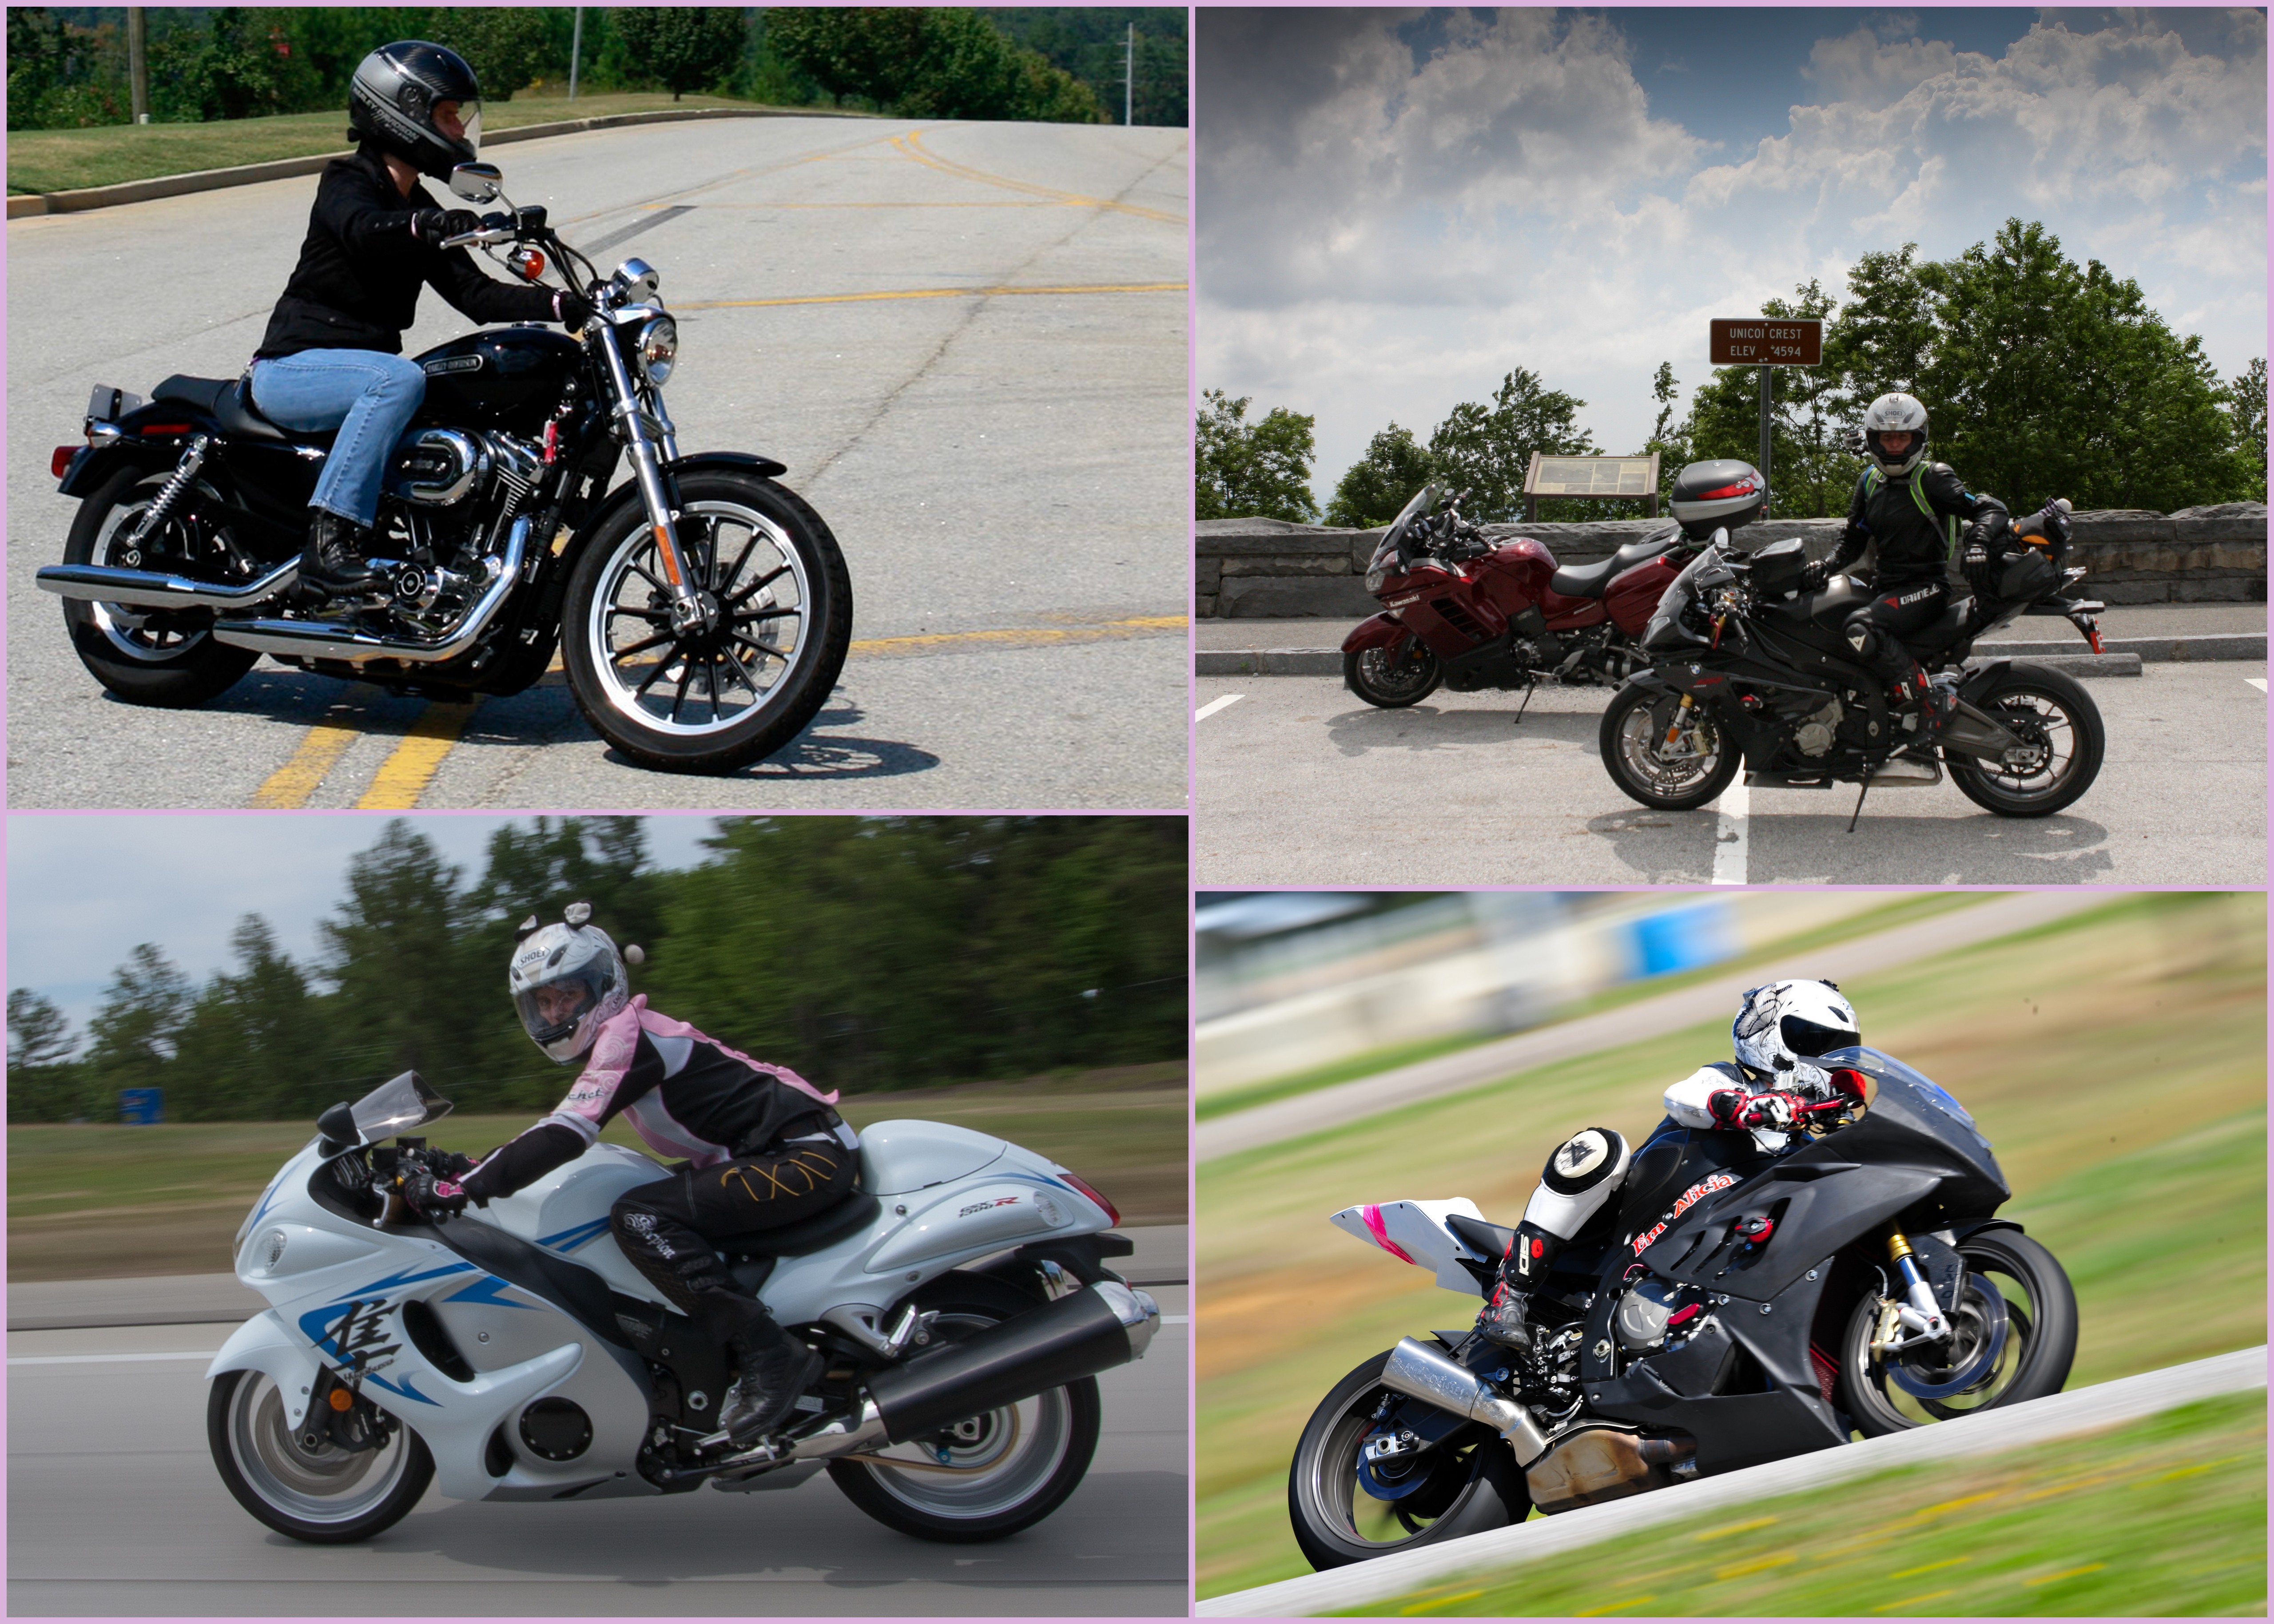 Profile of a Female Motorcyclist Meet Em Alicia - photo collage